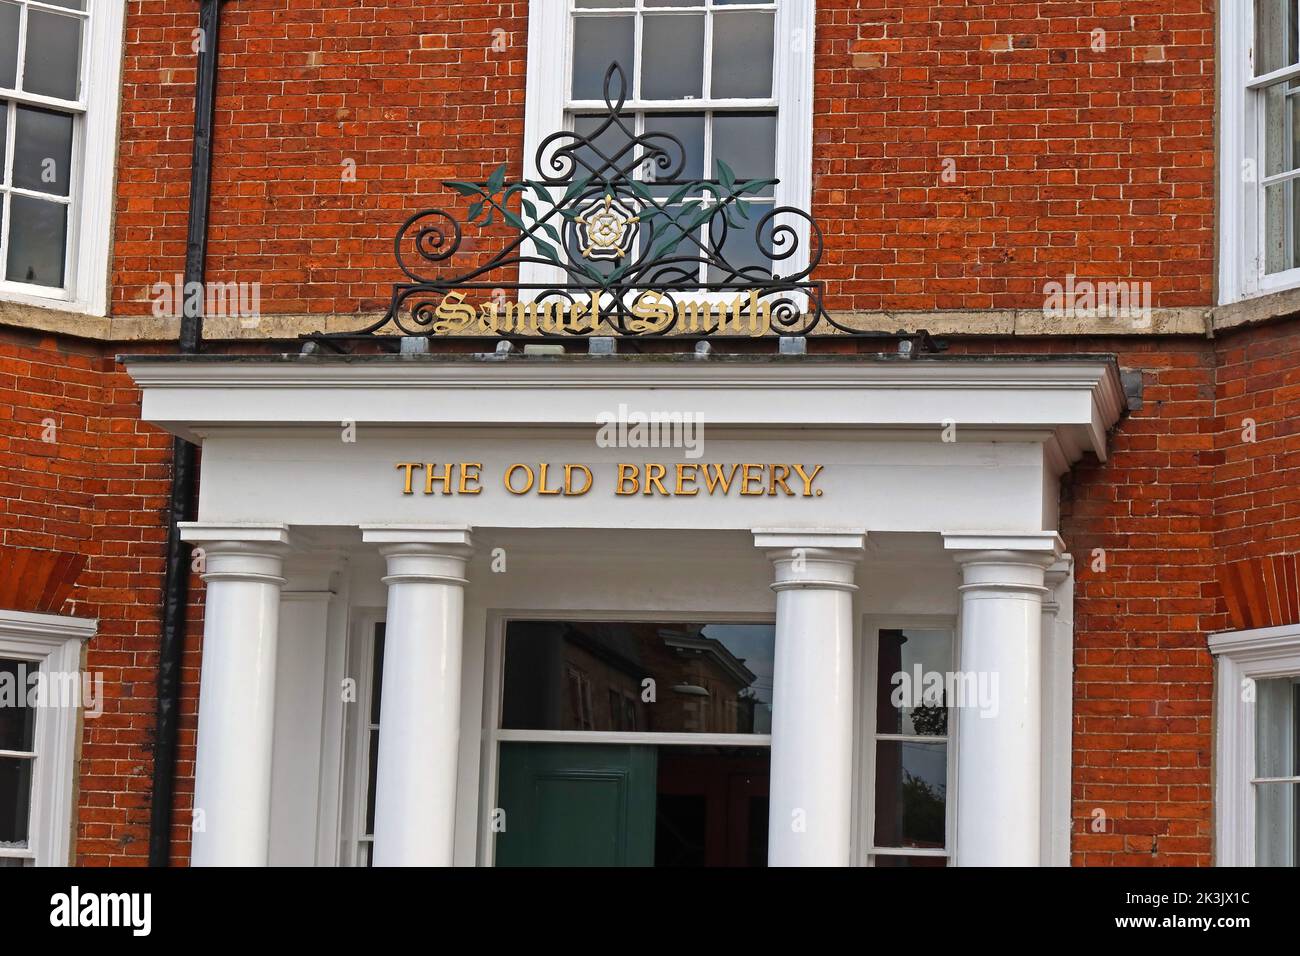 Samuel Smiths, Old Brewery & Deli, 3 High Street, Tadcaster, North Yorkshire, England UK, LS24 9AP Stockfoto